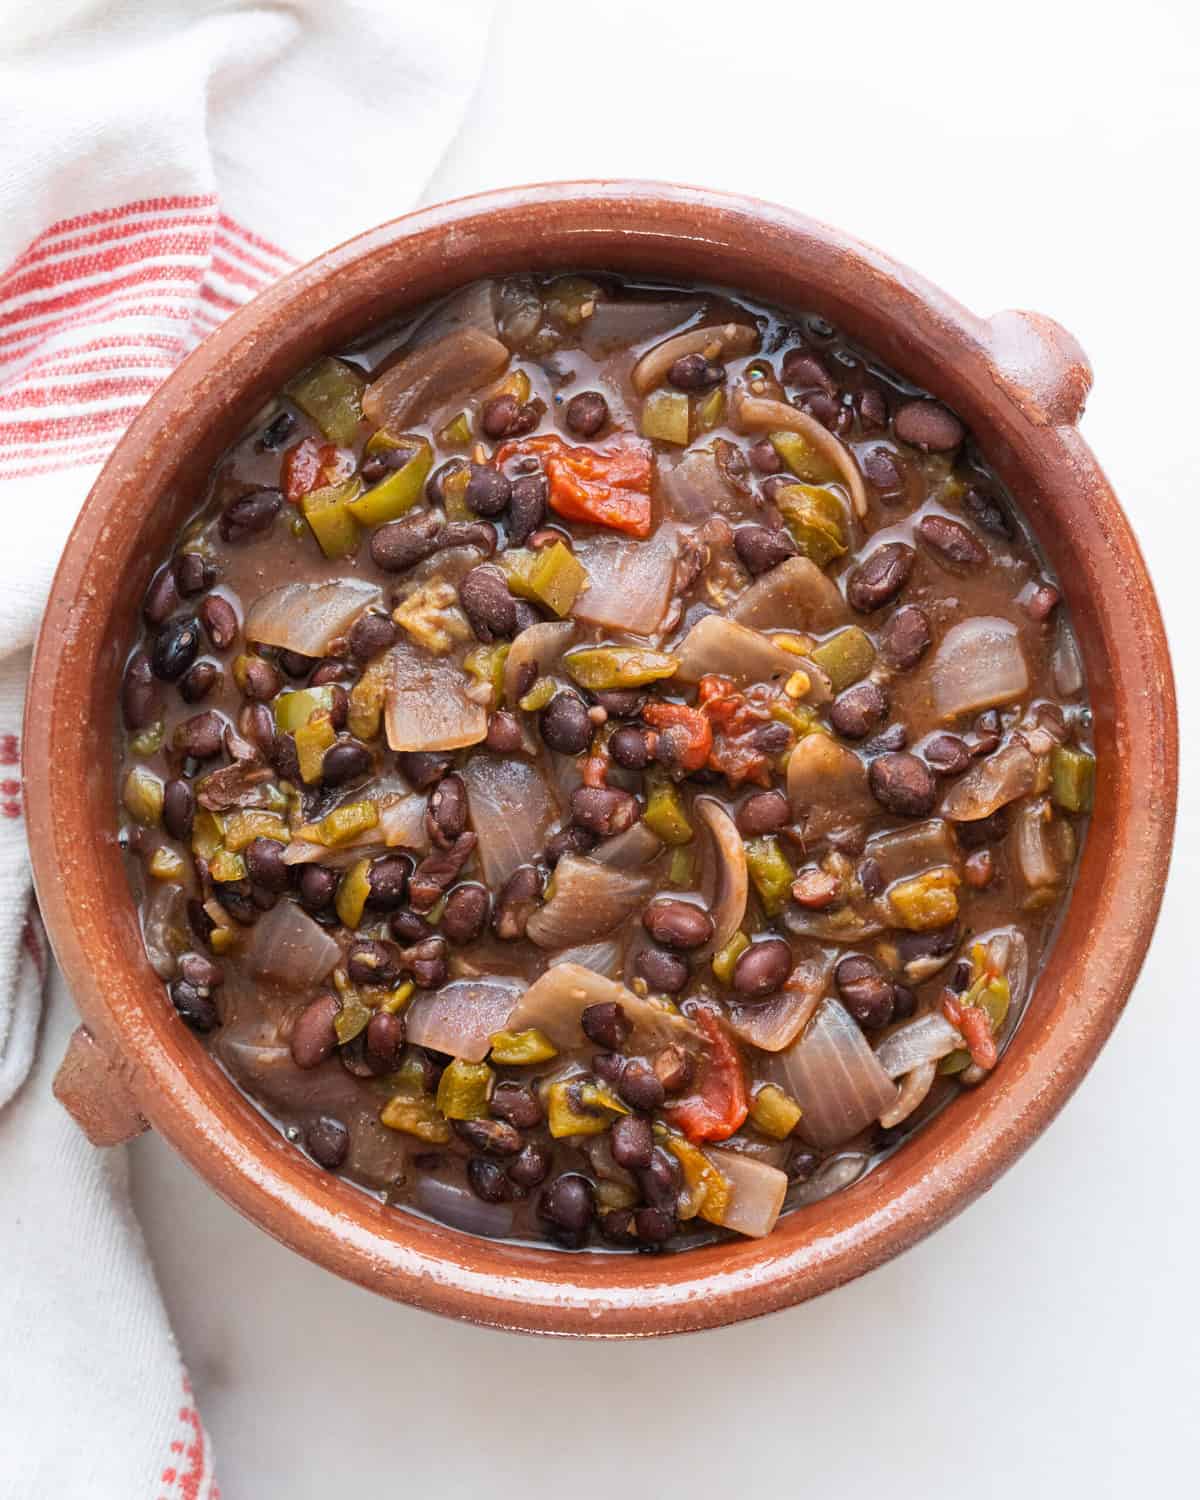 finished black bean chili in brown bowl against a white background